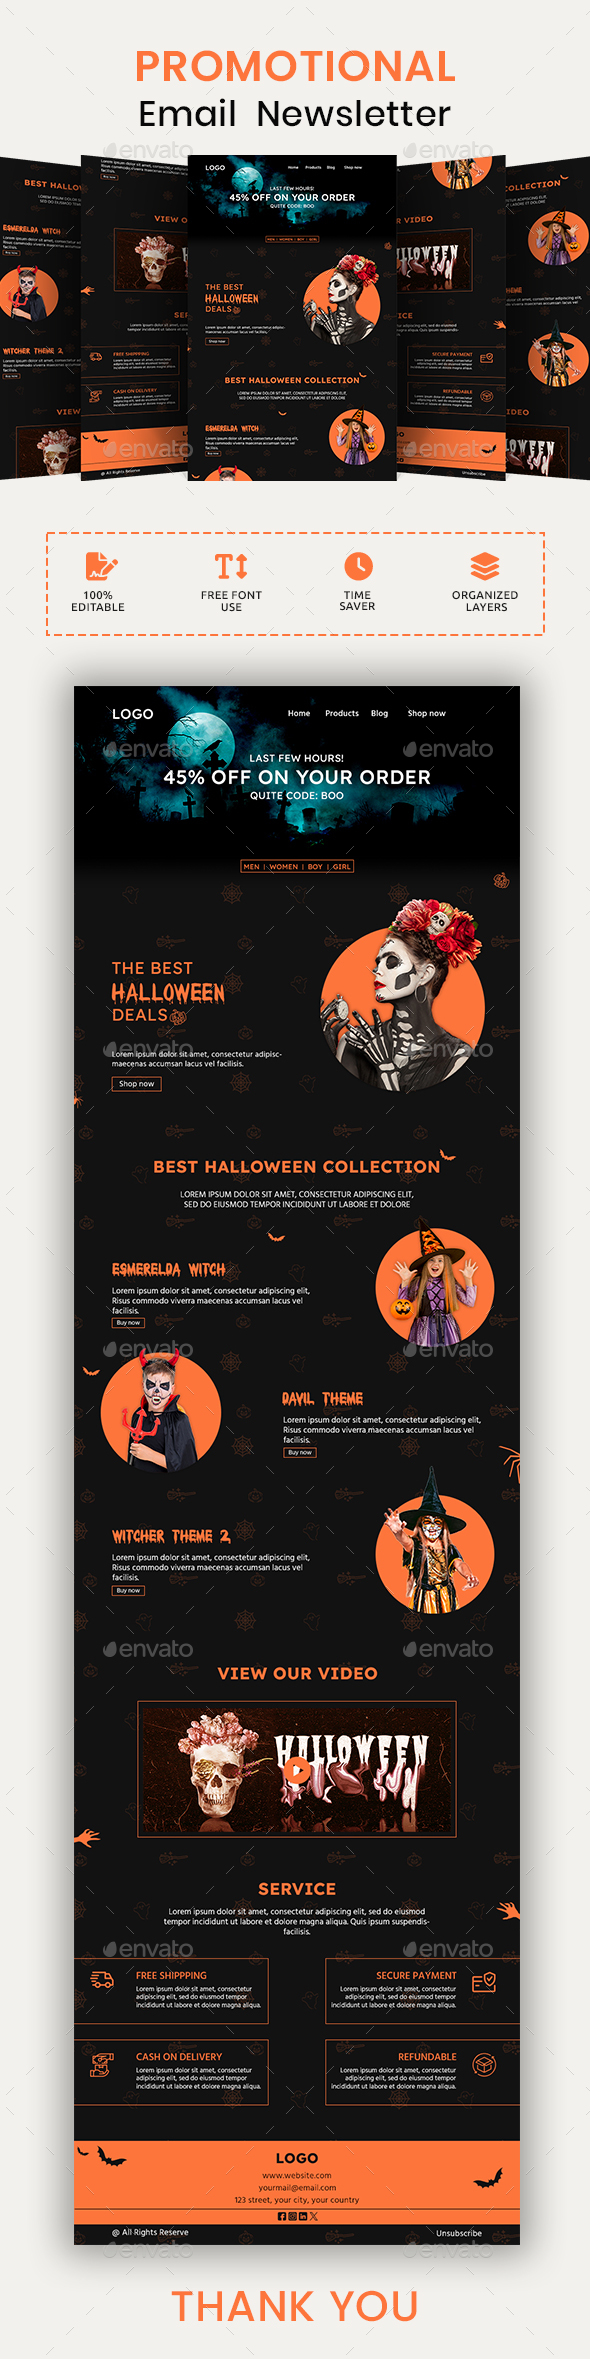 [DOWNLOAD]Halloween Offer Email Newsletter PSD Template